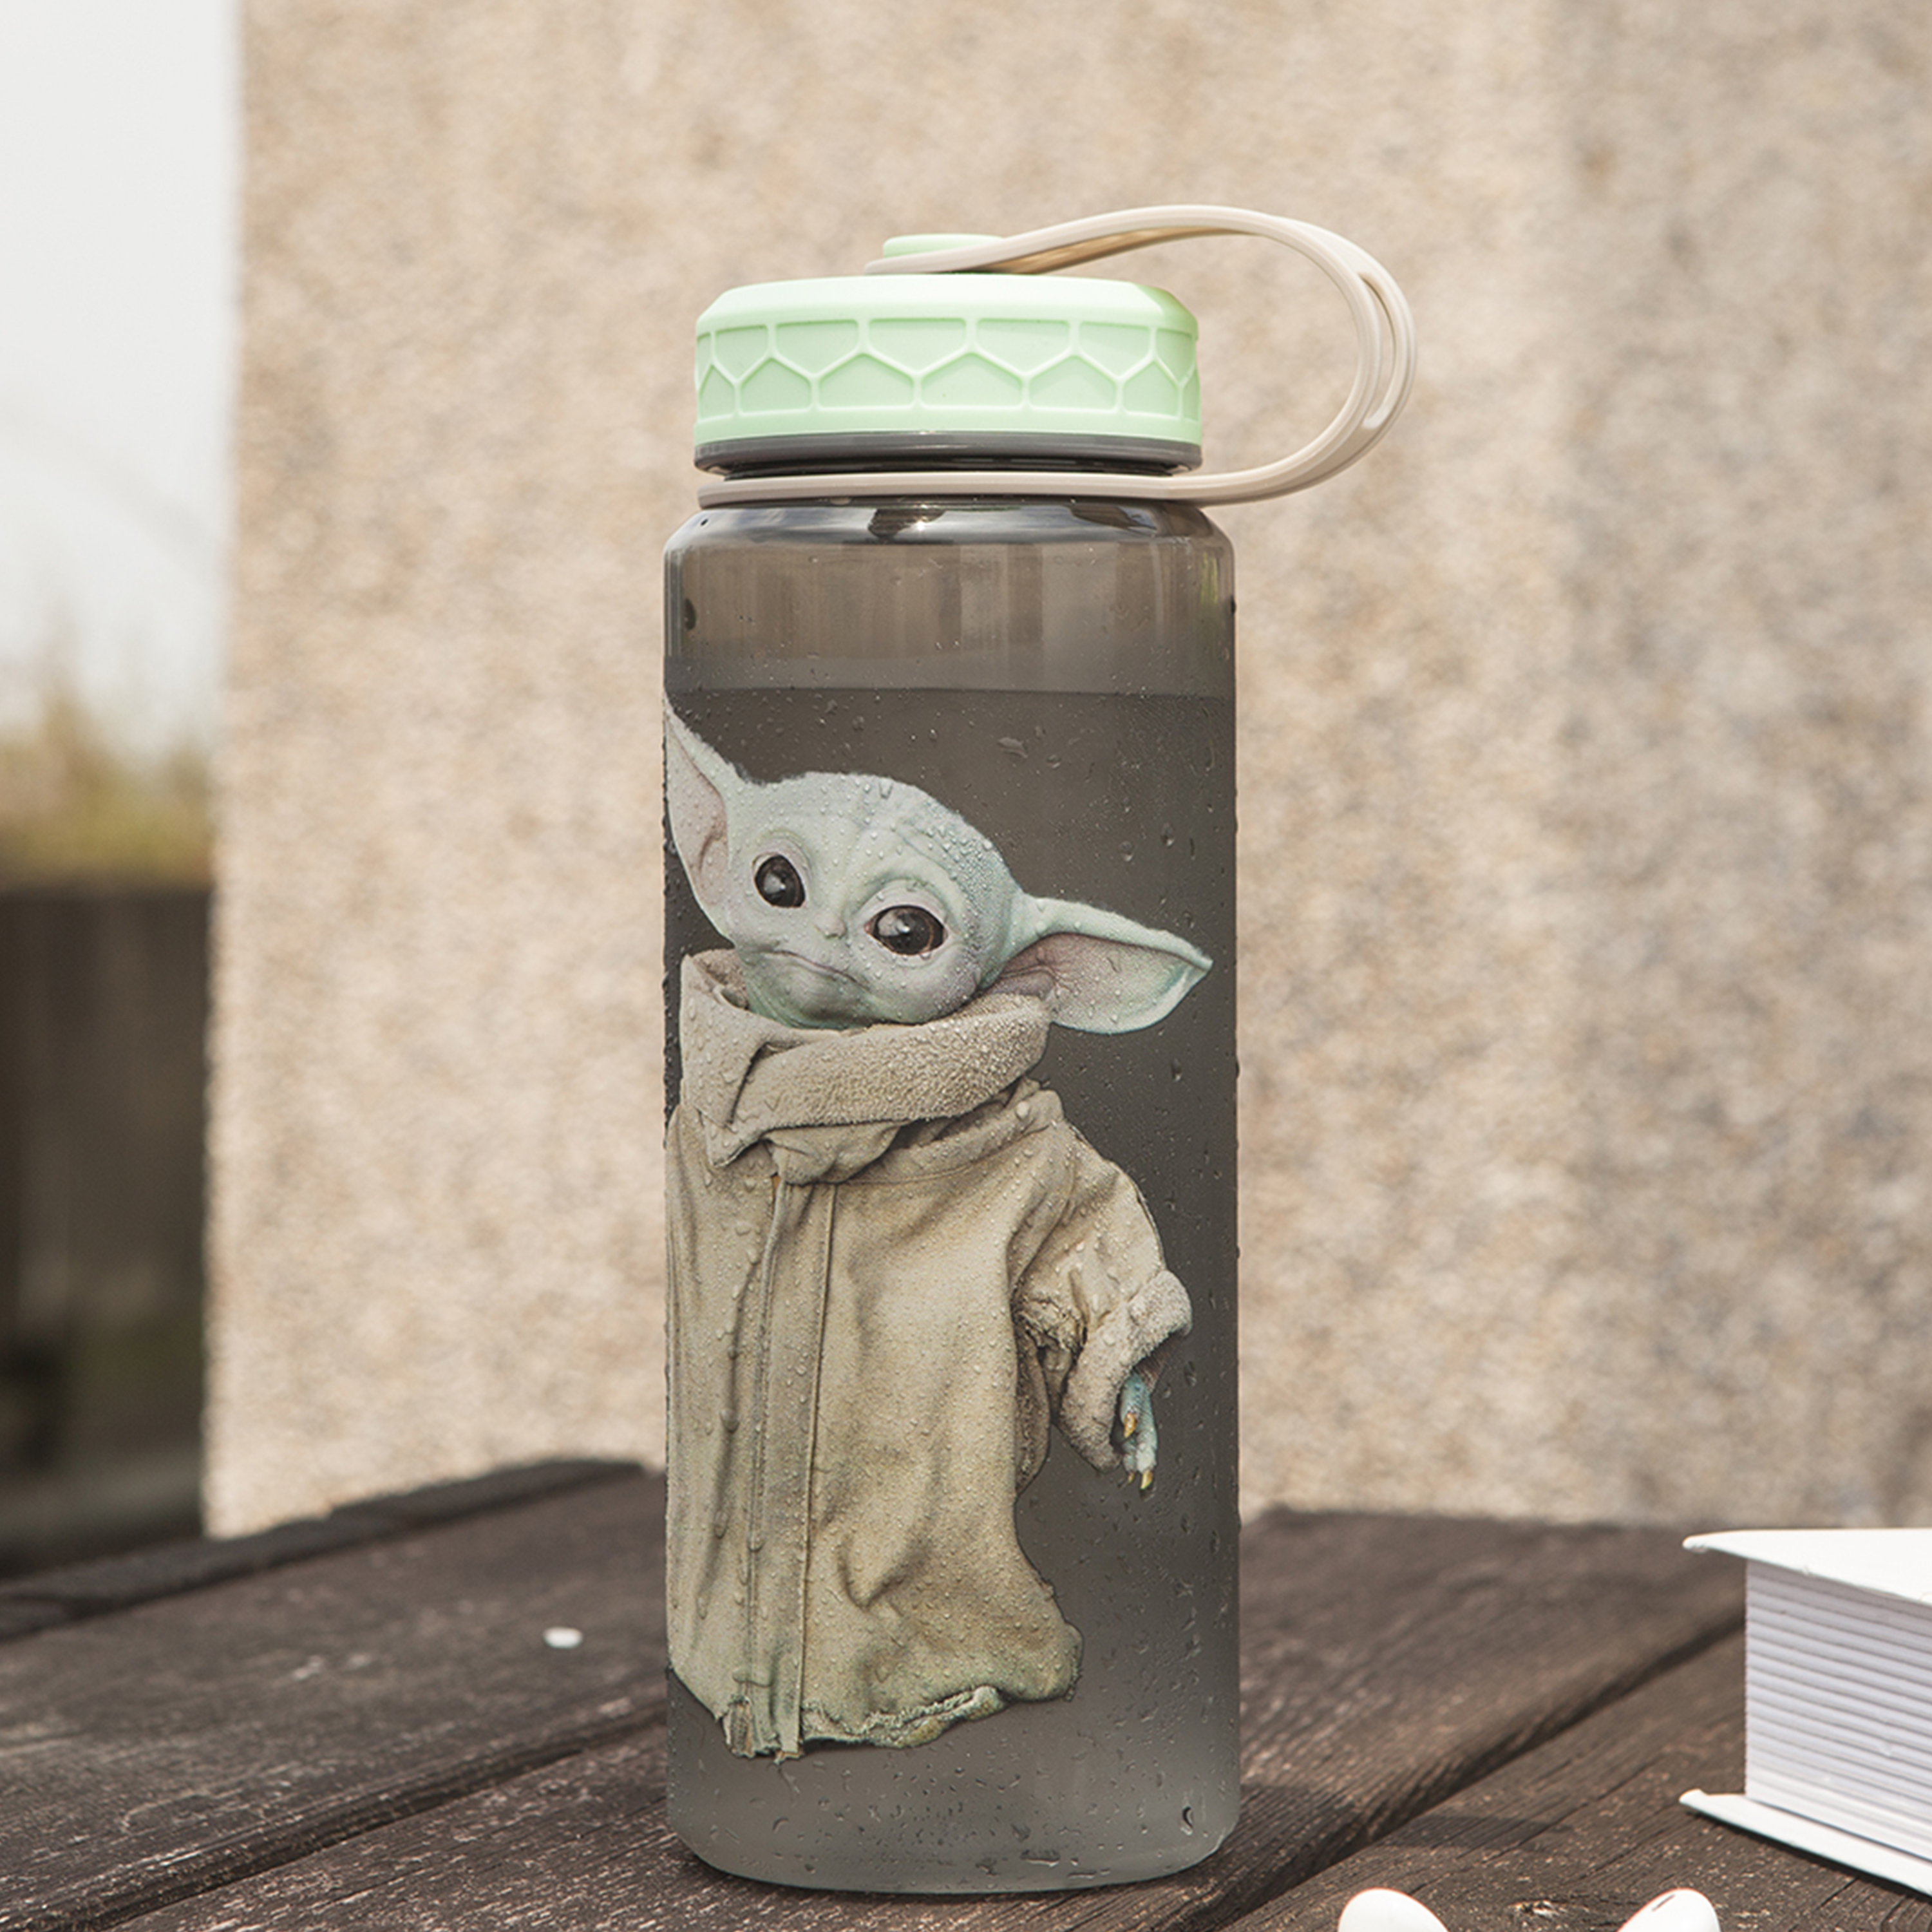 Star Wars: The Mandalorian 36 ounce Reusable Plastic Water Bottle, The Child (Baby Yoda) slideshow image 2